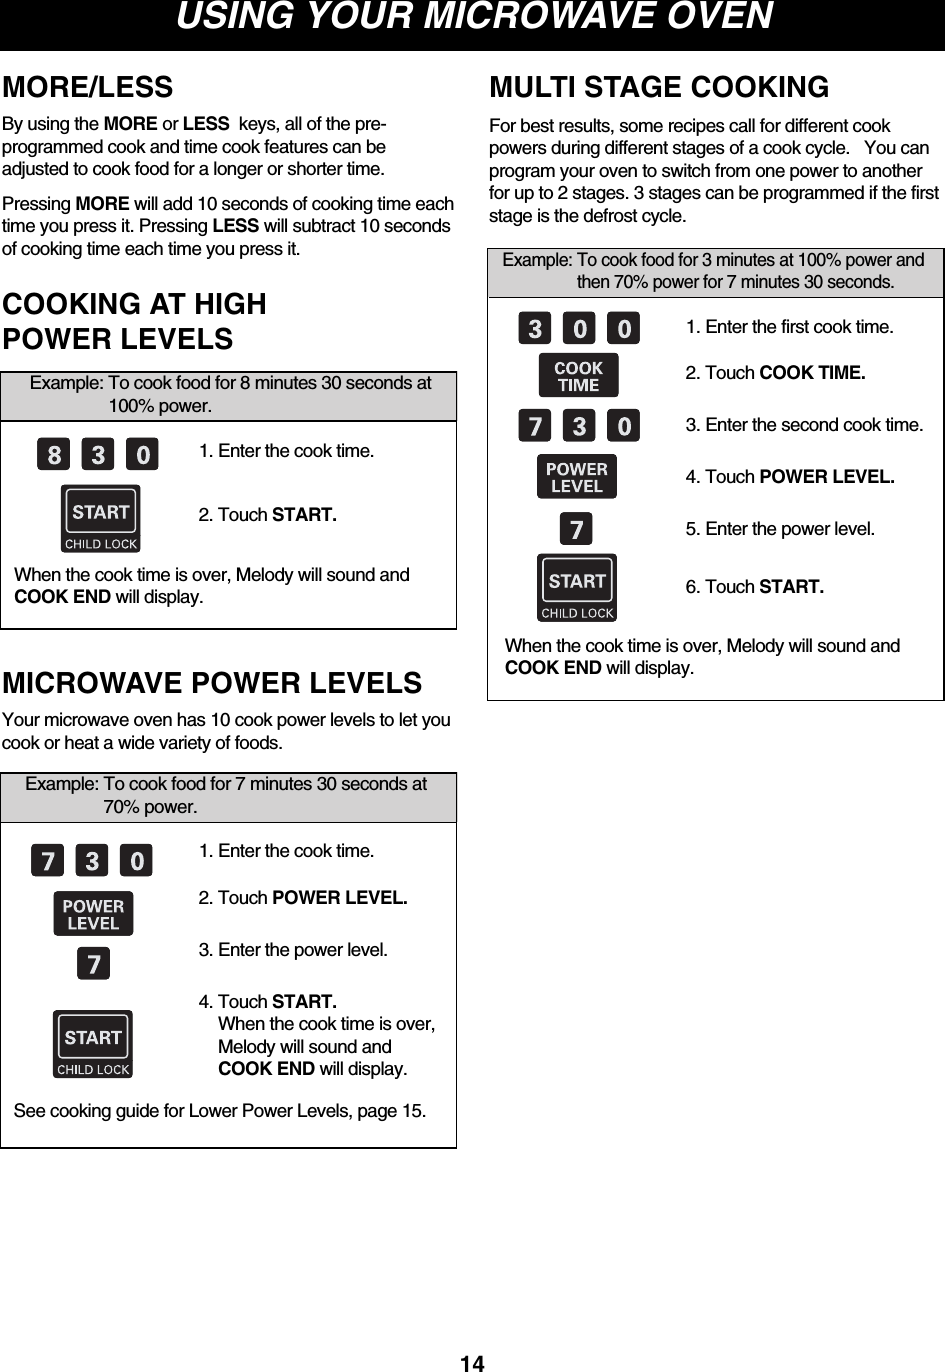 USING YOUR MICROWAVE OVEN14MORE/LESS By using the MORE or LESS  keys, all of the pre-programmed cook and time cook features can beadjusted to cook food for a longer or shorter time.Pressing MORE will add 10 seconds of cooking time eachtime you press it. Pressing LESS will subtract 10 secondsof cooking time each time you press it.When the cook time is over, Melody will sound andCOOK END will display.Example: To cook food for 8 minutes 30 seconds at100% power.COOKING AT HIGH POWER LEVELS1. Enter the cook time.2. Touch START.Example: To cook food for 7 minutes 30 seconds at70% power.1. Enter the cook time.2. Touch POWER LEVEL.3. Enter the power level.4. Touch START.When the cook time is over,Melody will sound andCOOK END will display.Your microwave oven has 10 cook power levels to let youcook or heat a wide variety of foods.See cooking guide for Lower Power Levels, page 15.MICROWAVE POWER LEVELSExample: To cook food for 3 minutes at 100% power andthen 70% power for 7 minutes 30 seconds.1. Enter the first cook time.2. Touch COOK TIME.3. Enter the second cook time.4. Touch POWER LEVEL.5. Enter the power level.6. Touch START.For best results, some recipes call for different cookpowers during different stages of a cook cycle.   You canprogram your oven to switch from one power to anotherfor up to 2 stages. 3 stages can be programmed if the firststage is the defrost cycle.When the cook time is over, Melody will sound andCOOK END will display.MULTI STAGE COOKING